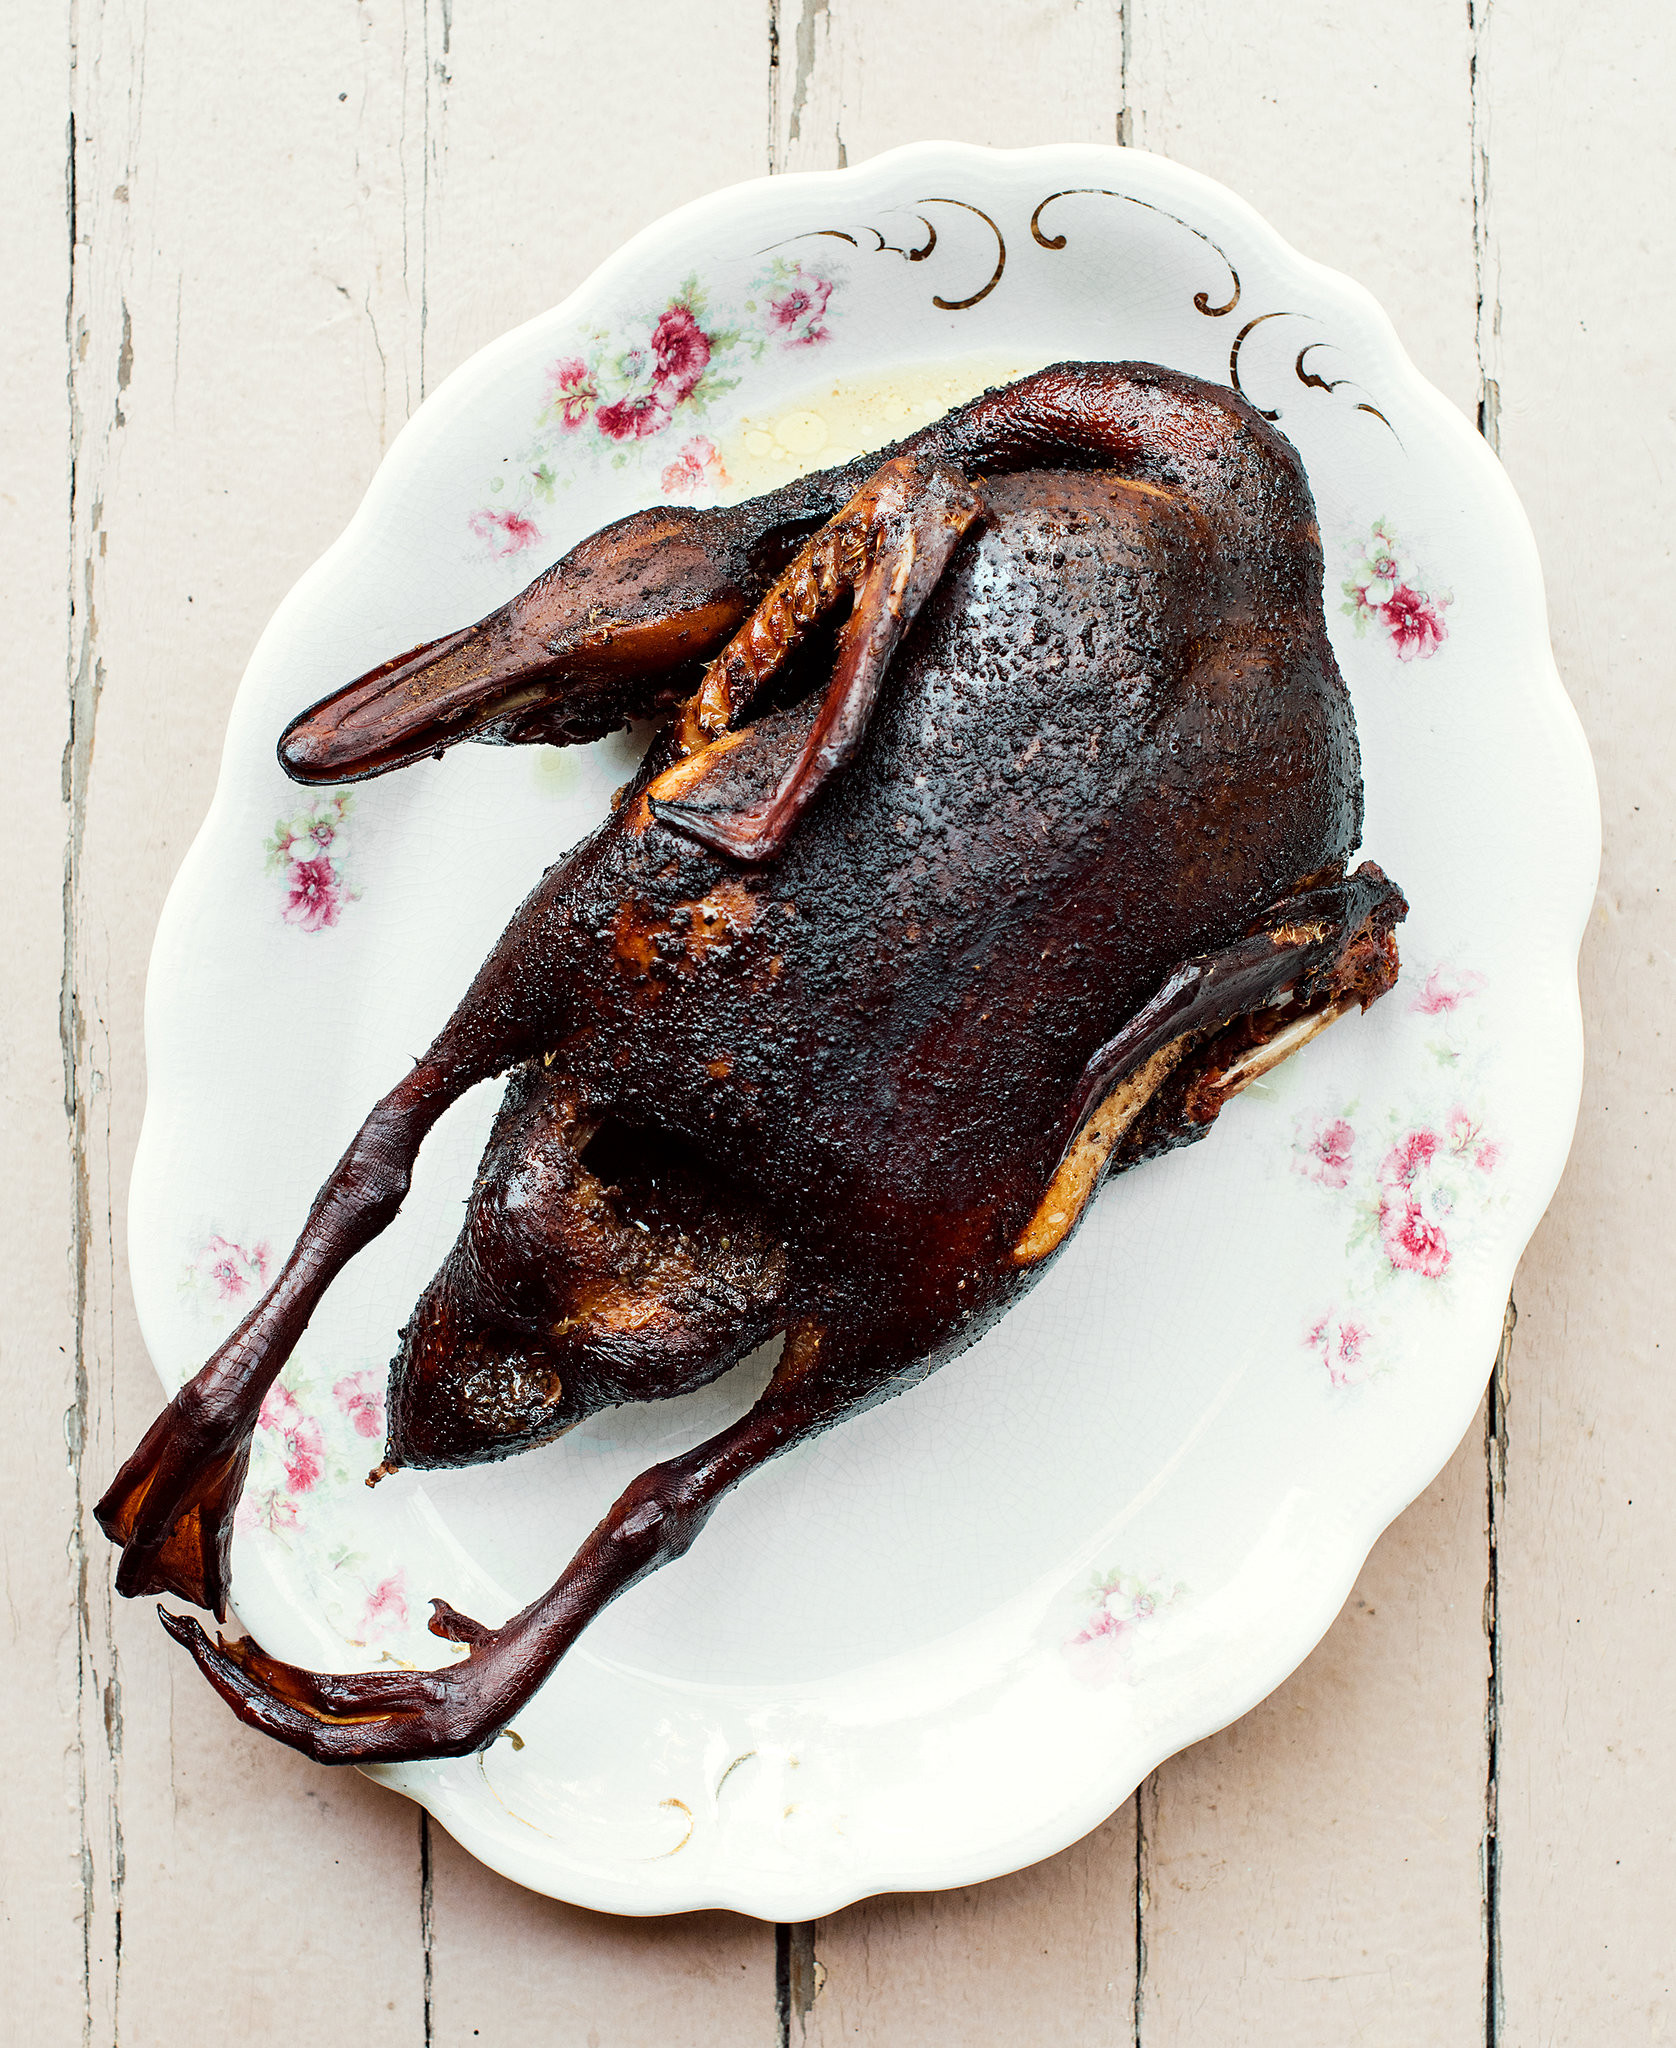 Duck Head Recipes
 South Texas Barbecued Duck Recipe NYT Cooking